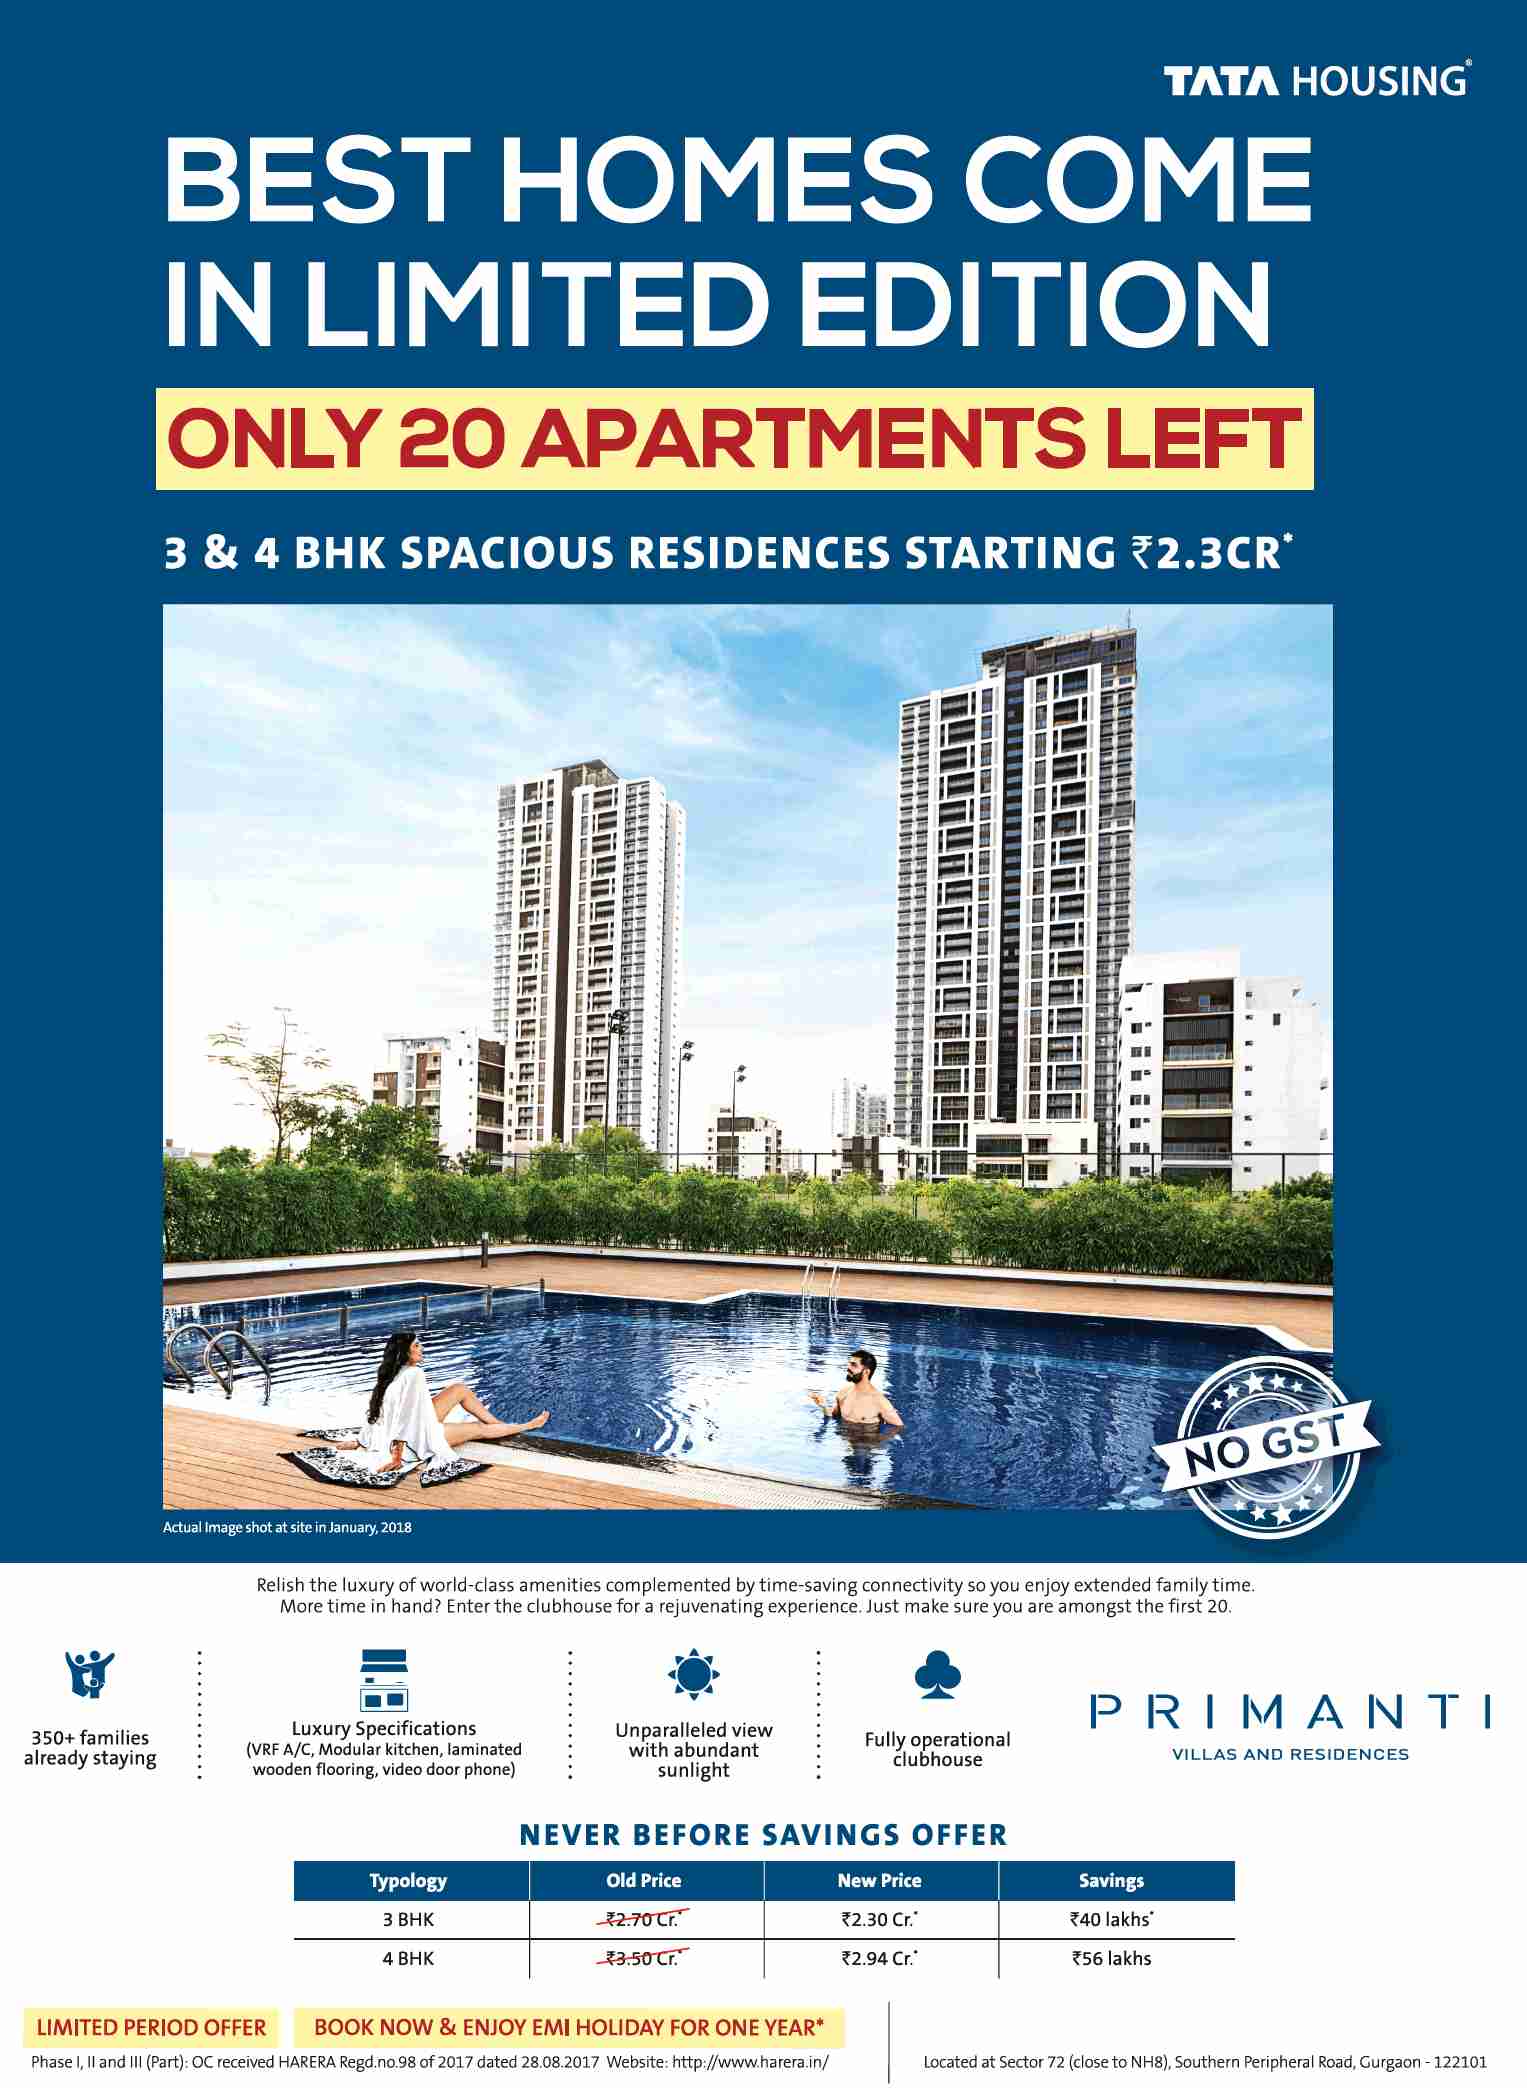 Only 20 apartments left at Tata Primanti in Gurgaon